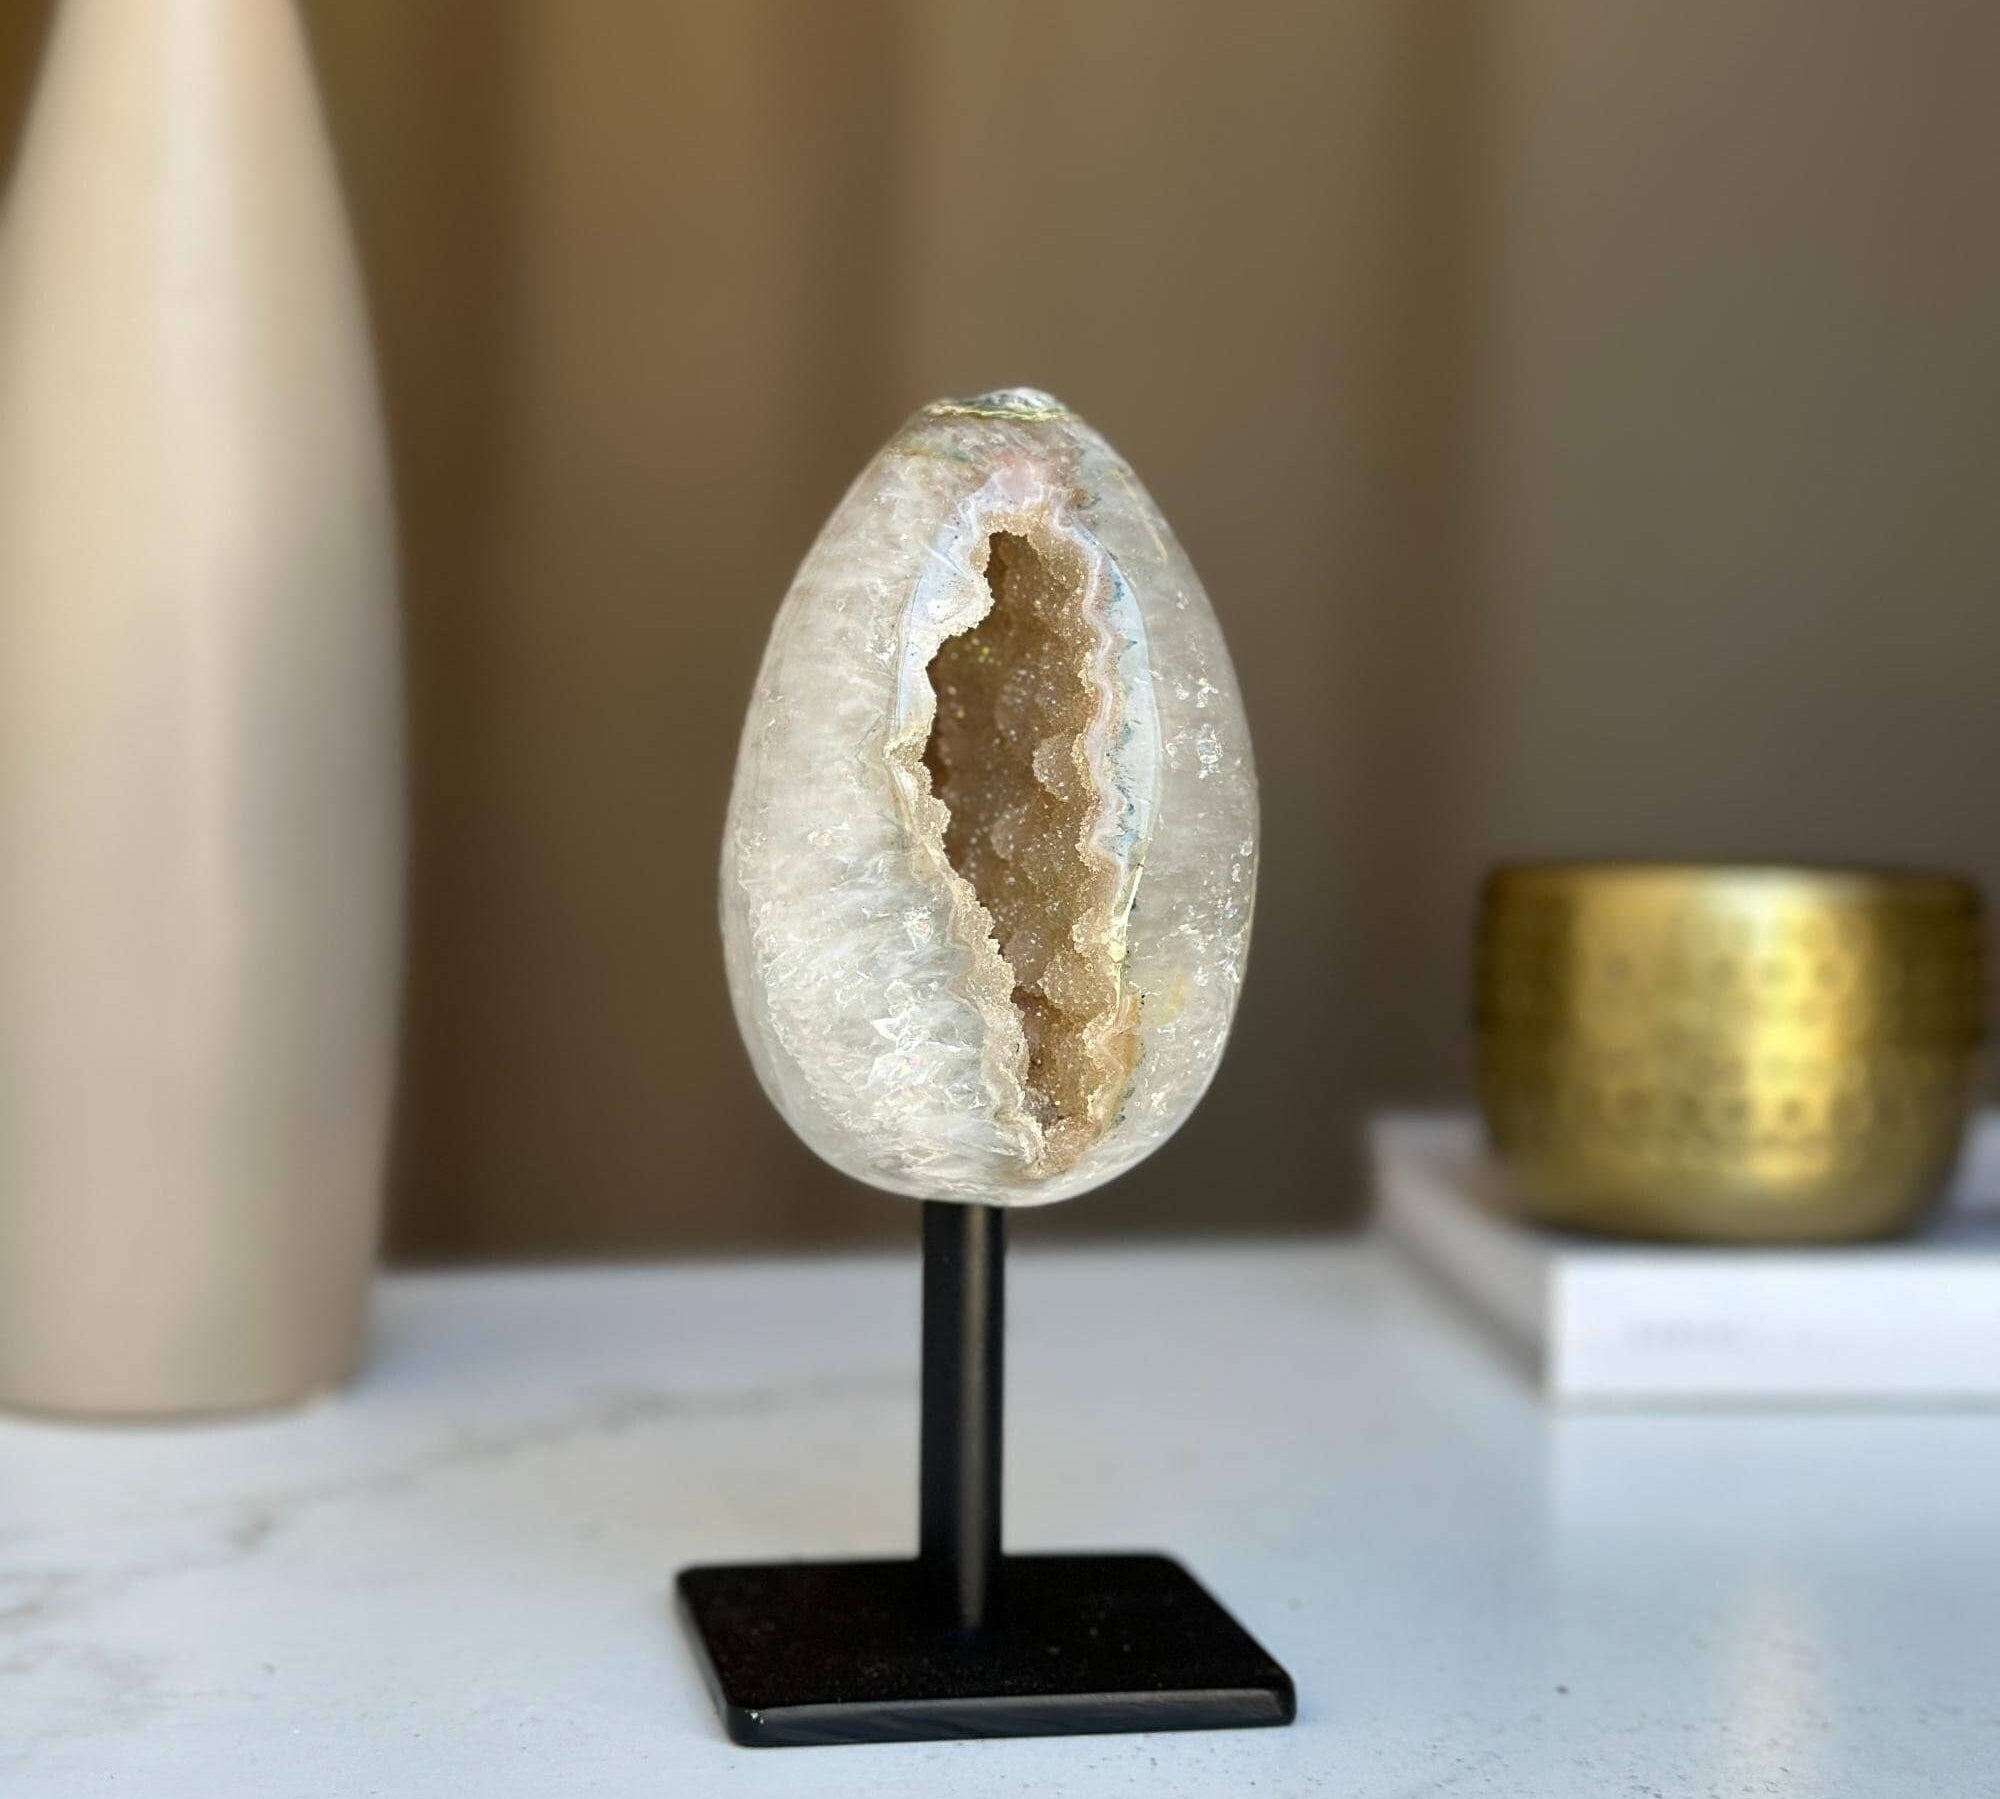 Egg Shaped Crystal on Stand, Agate and Pink Amethyst, Rare Unique Jasper and Agate Crystal on Metal Stand, Elevate your home decor